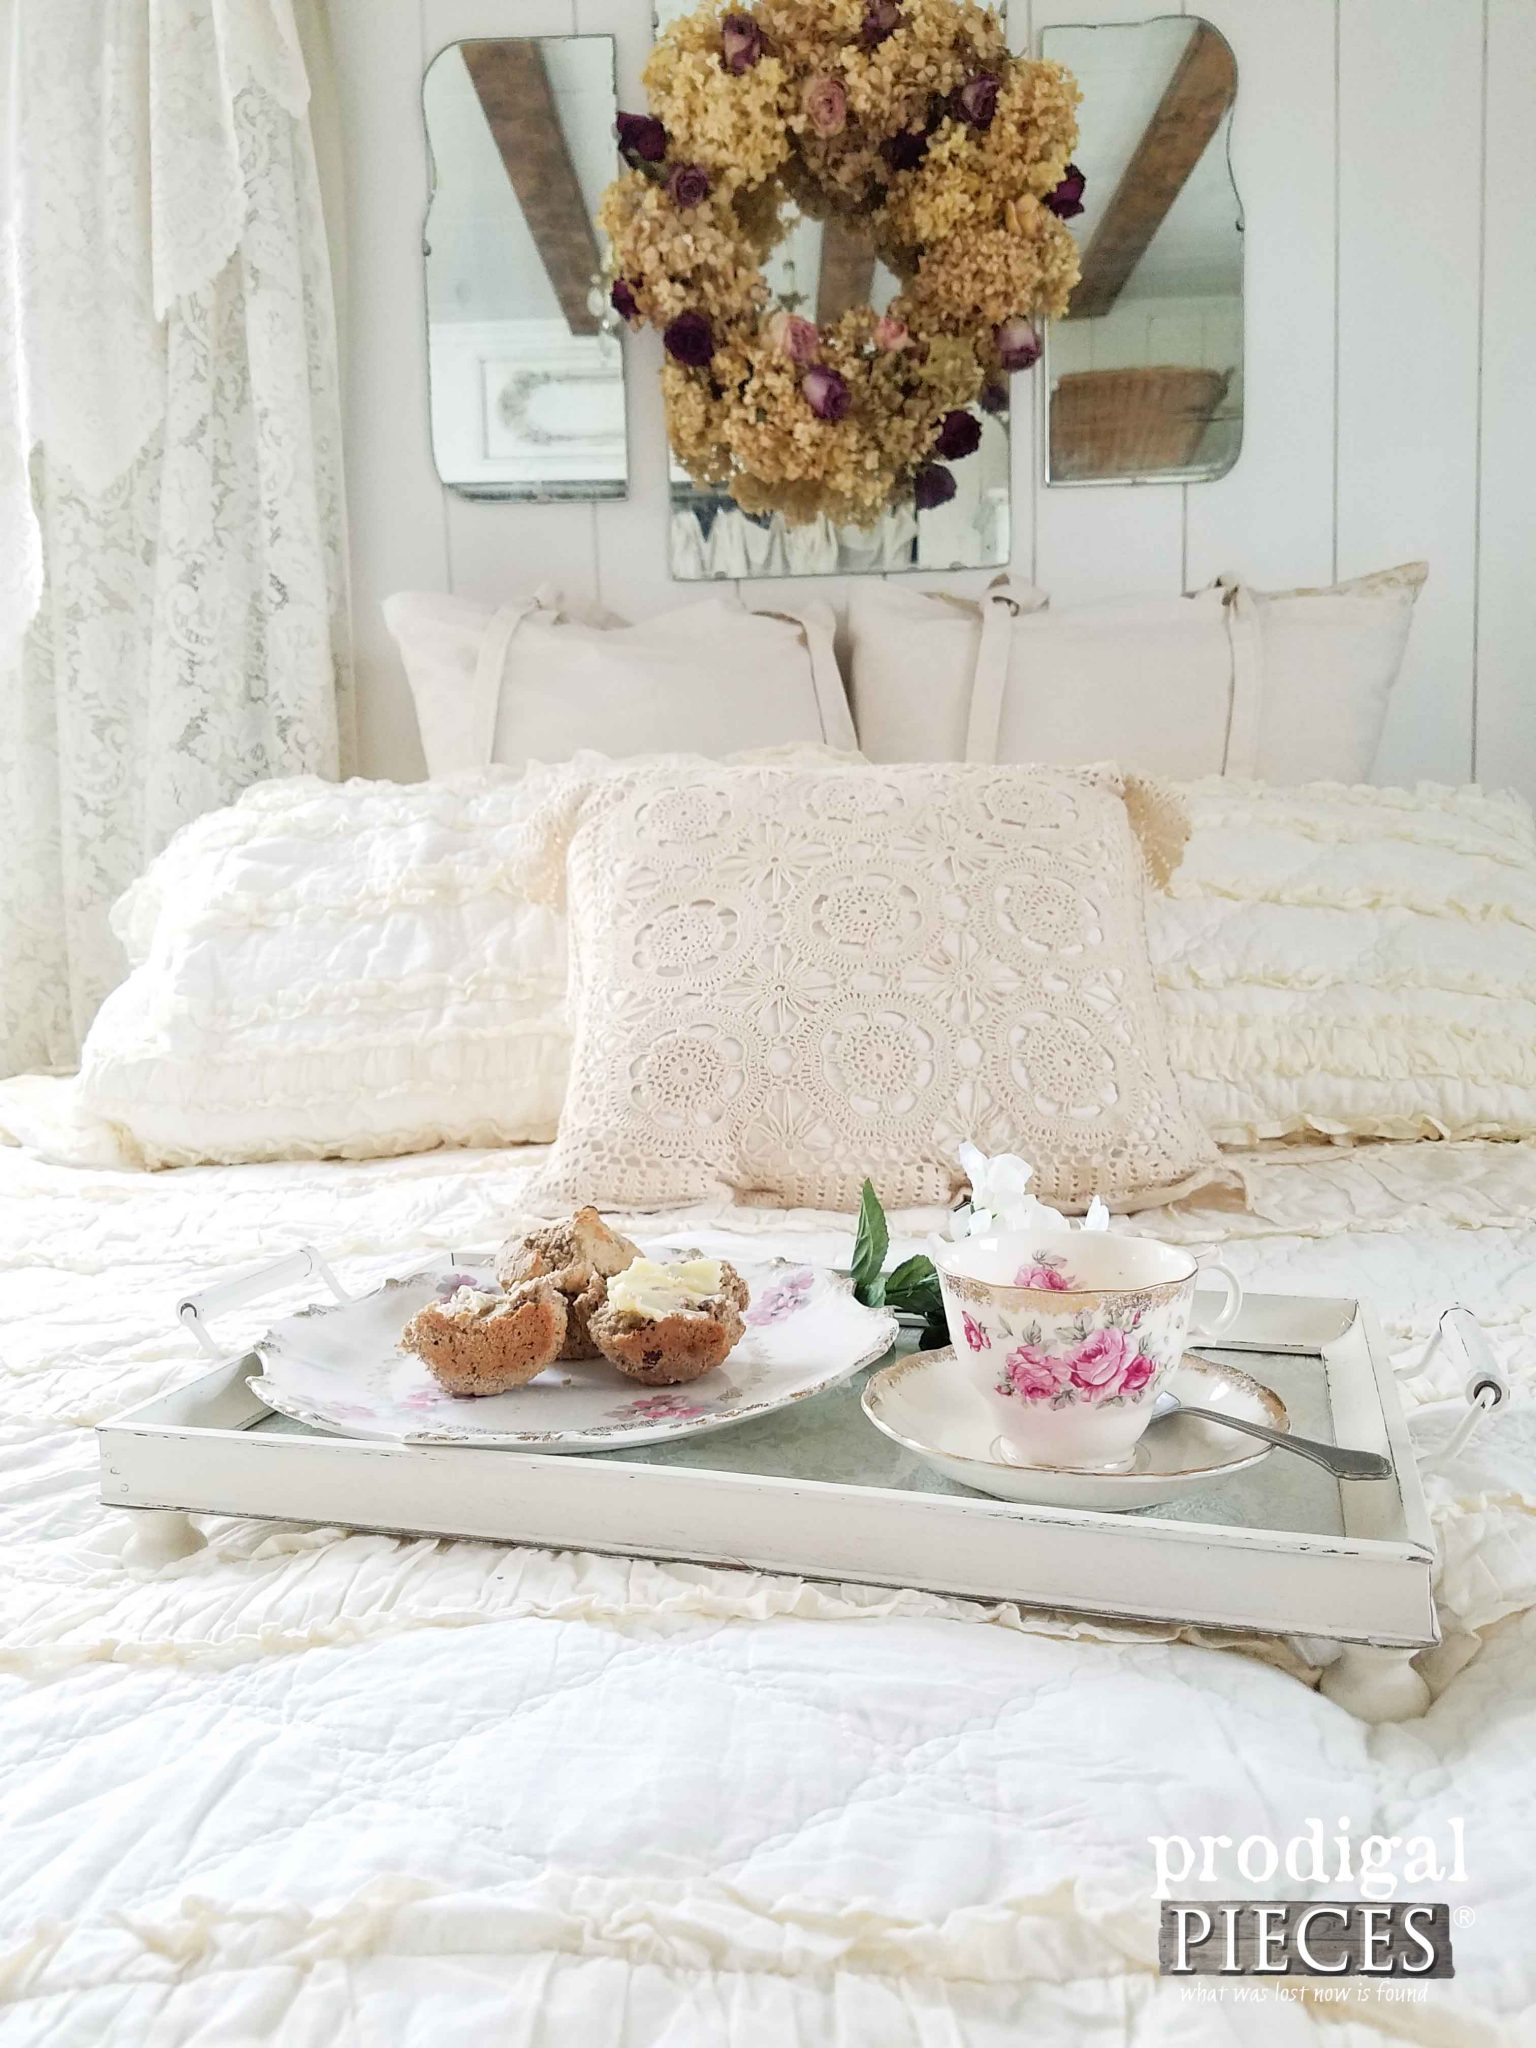 Thrifted Tray in Farmhouse Style Bedroom | Prodigal Pieces | prodigalpieces.com